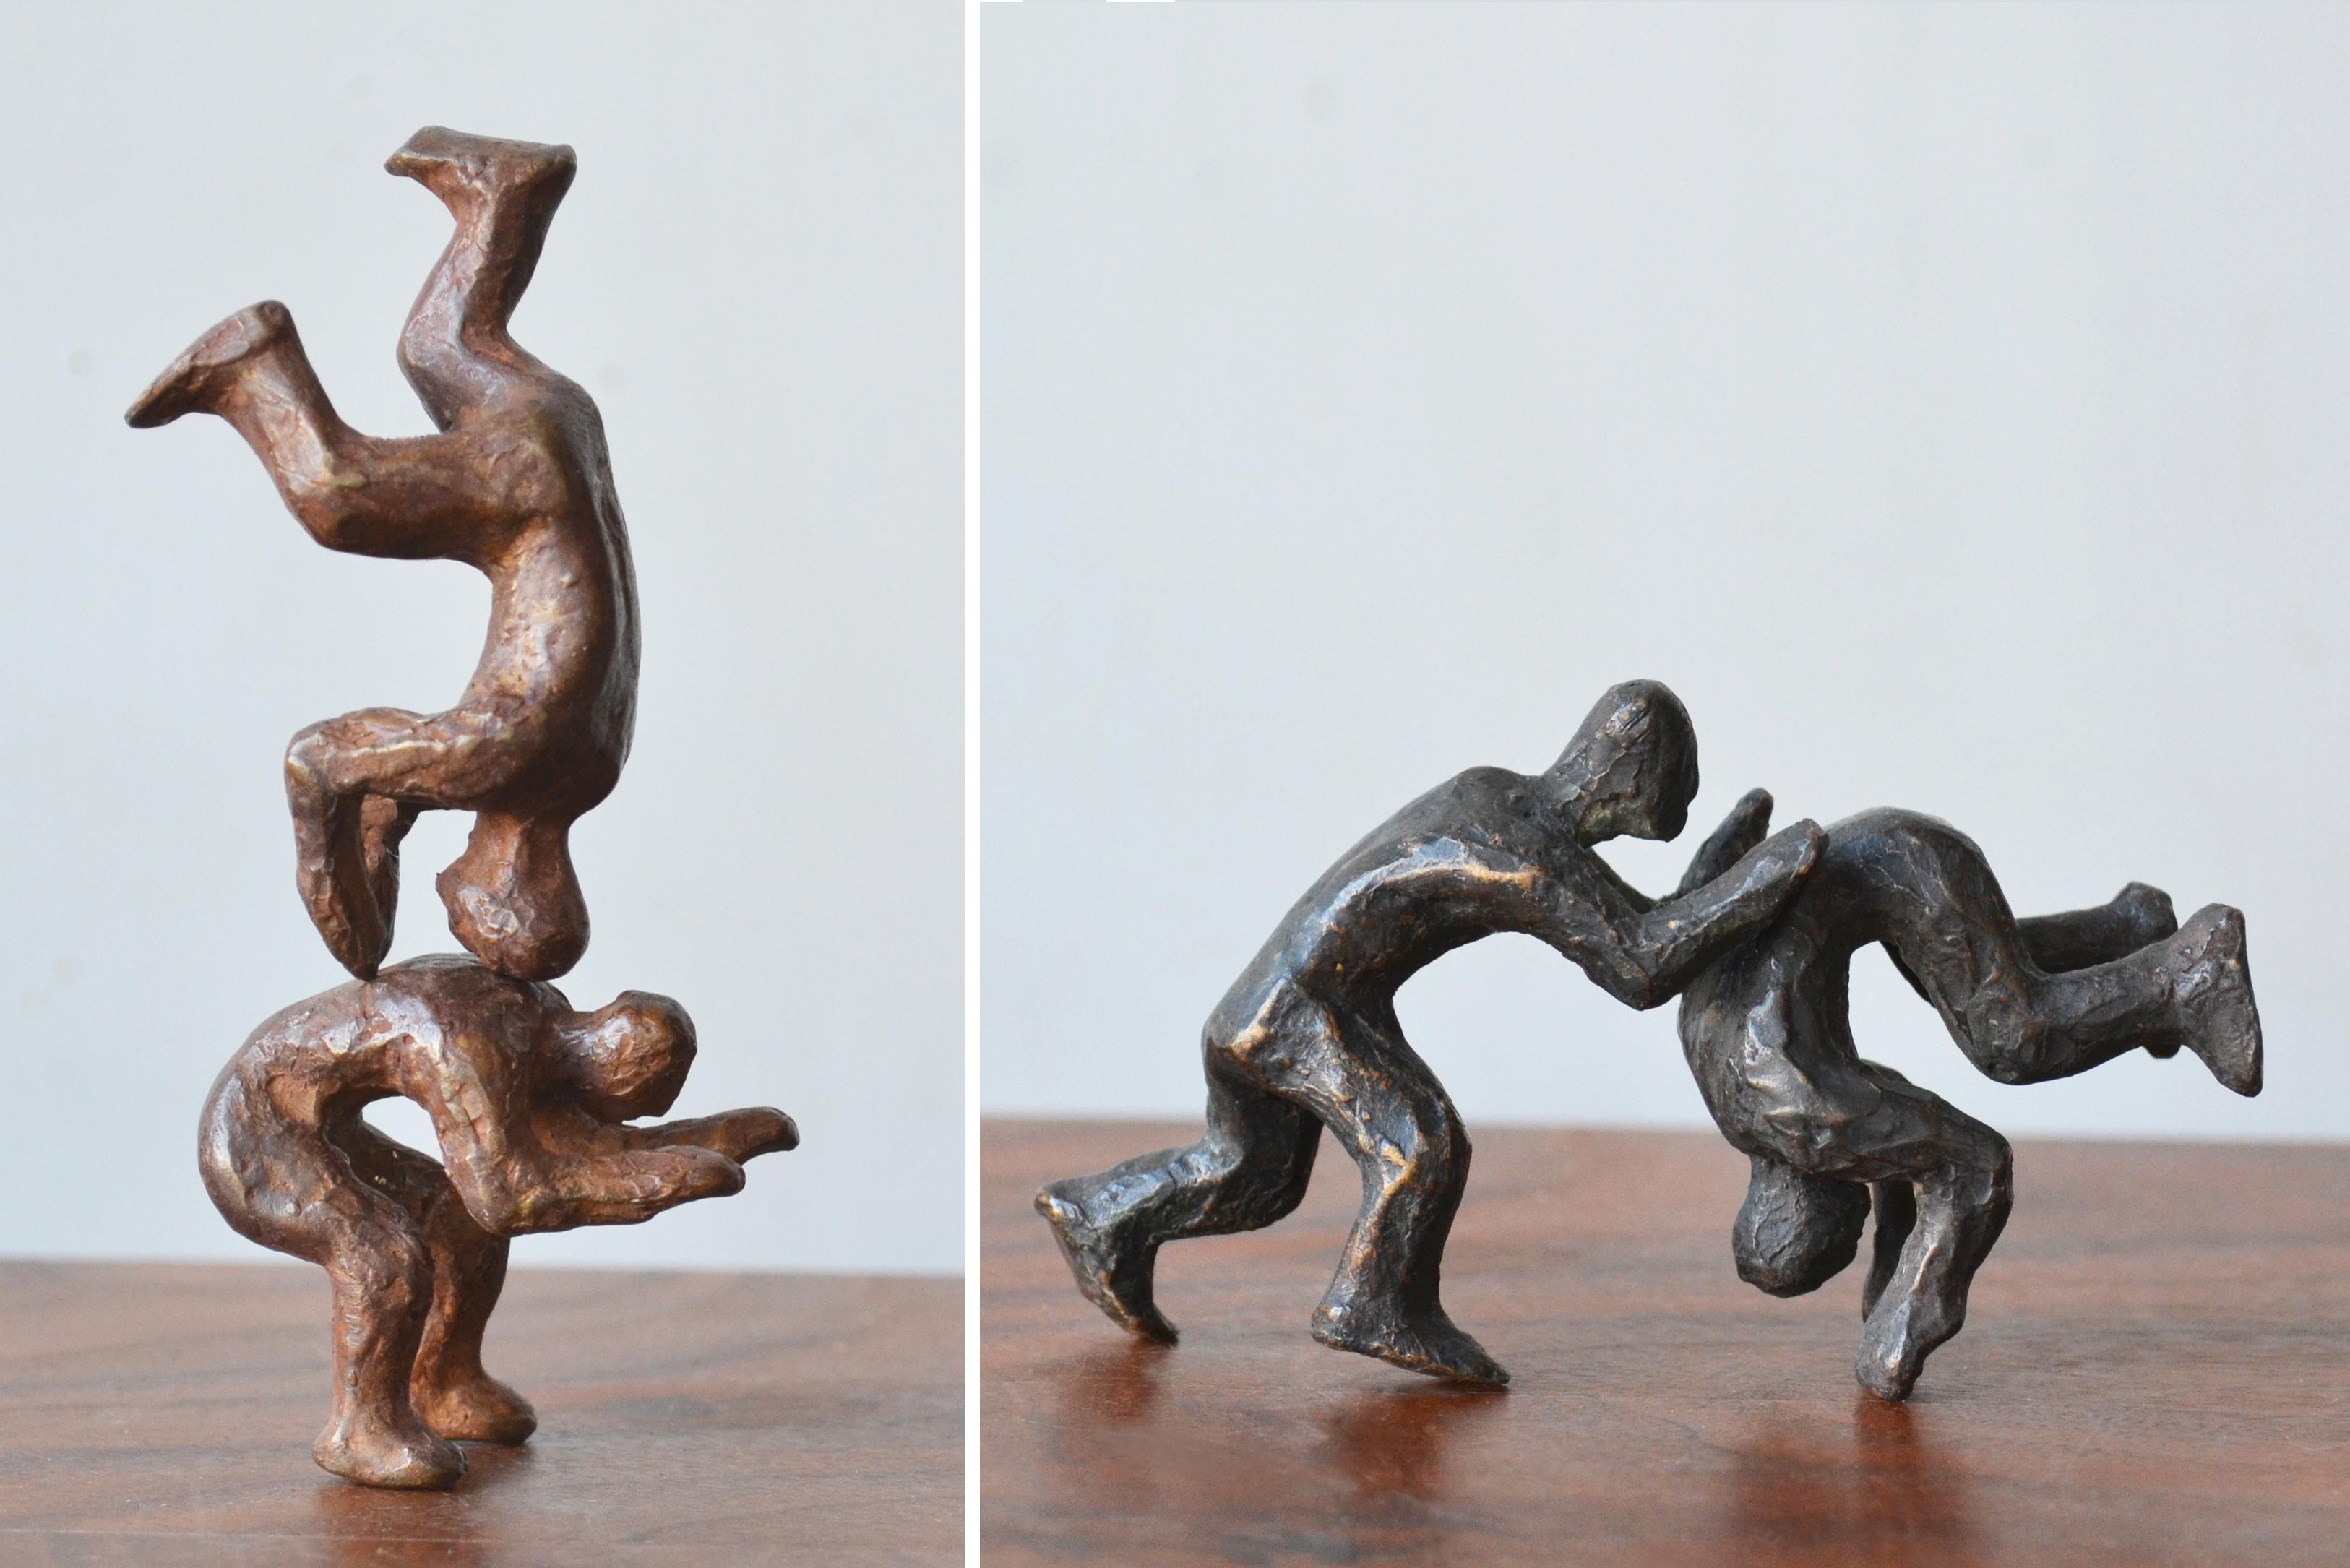 Noa Bornstein Figurative Sculpture - "Why Fight When You Can Play?" 4 pairs of interactive bronze figures